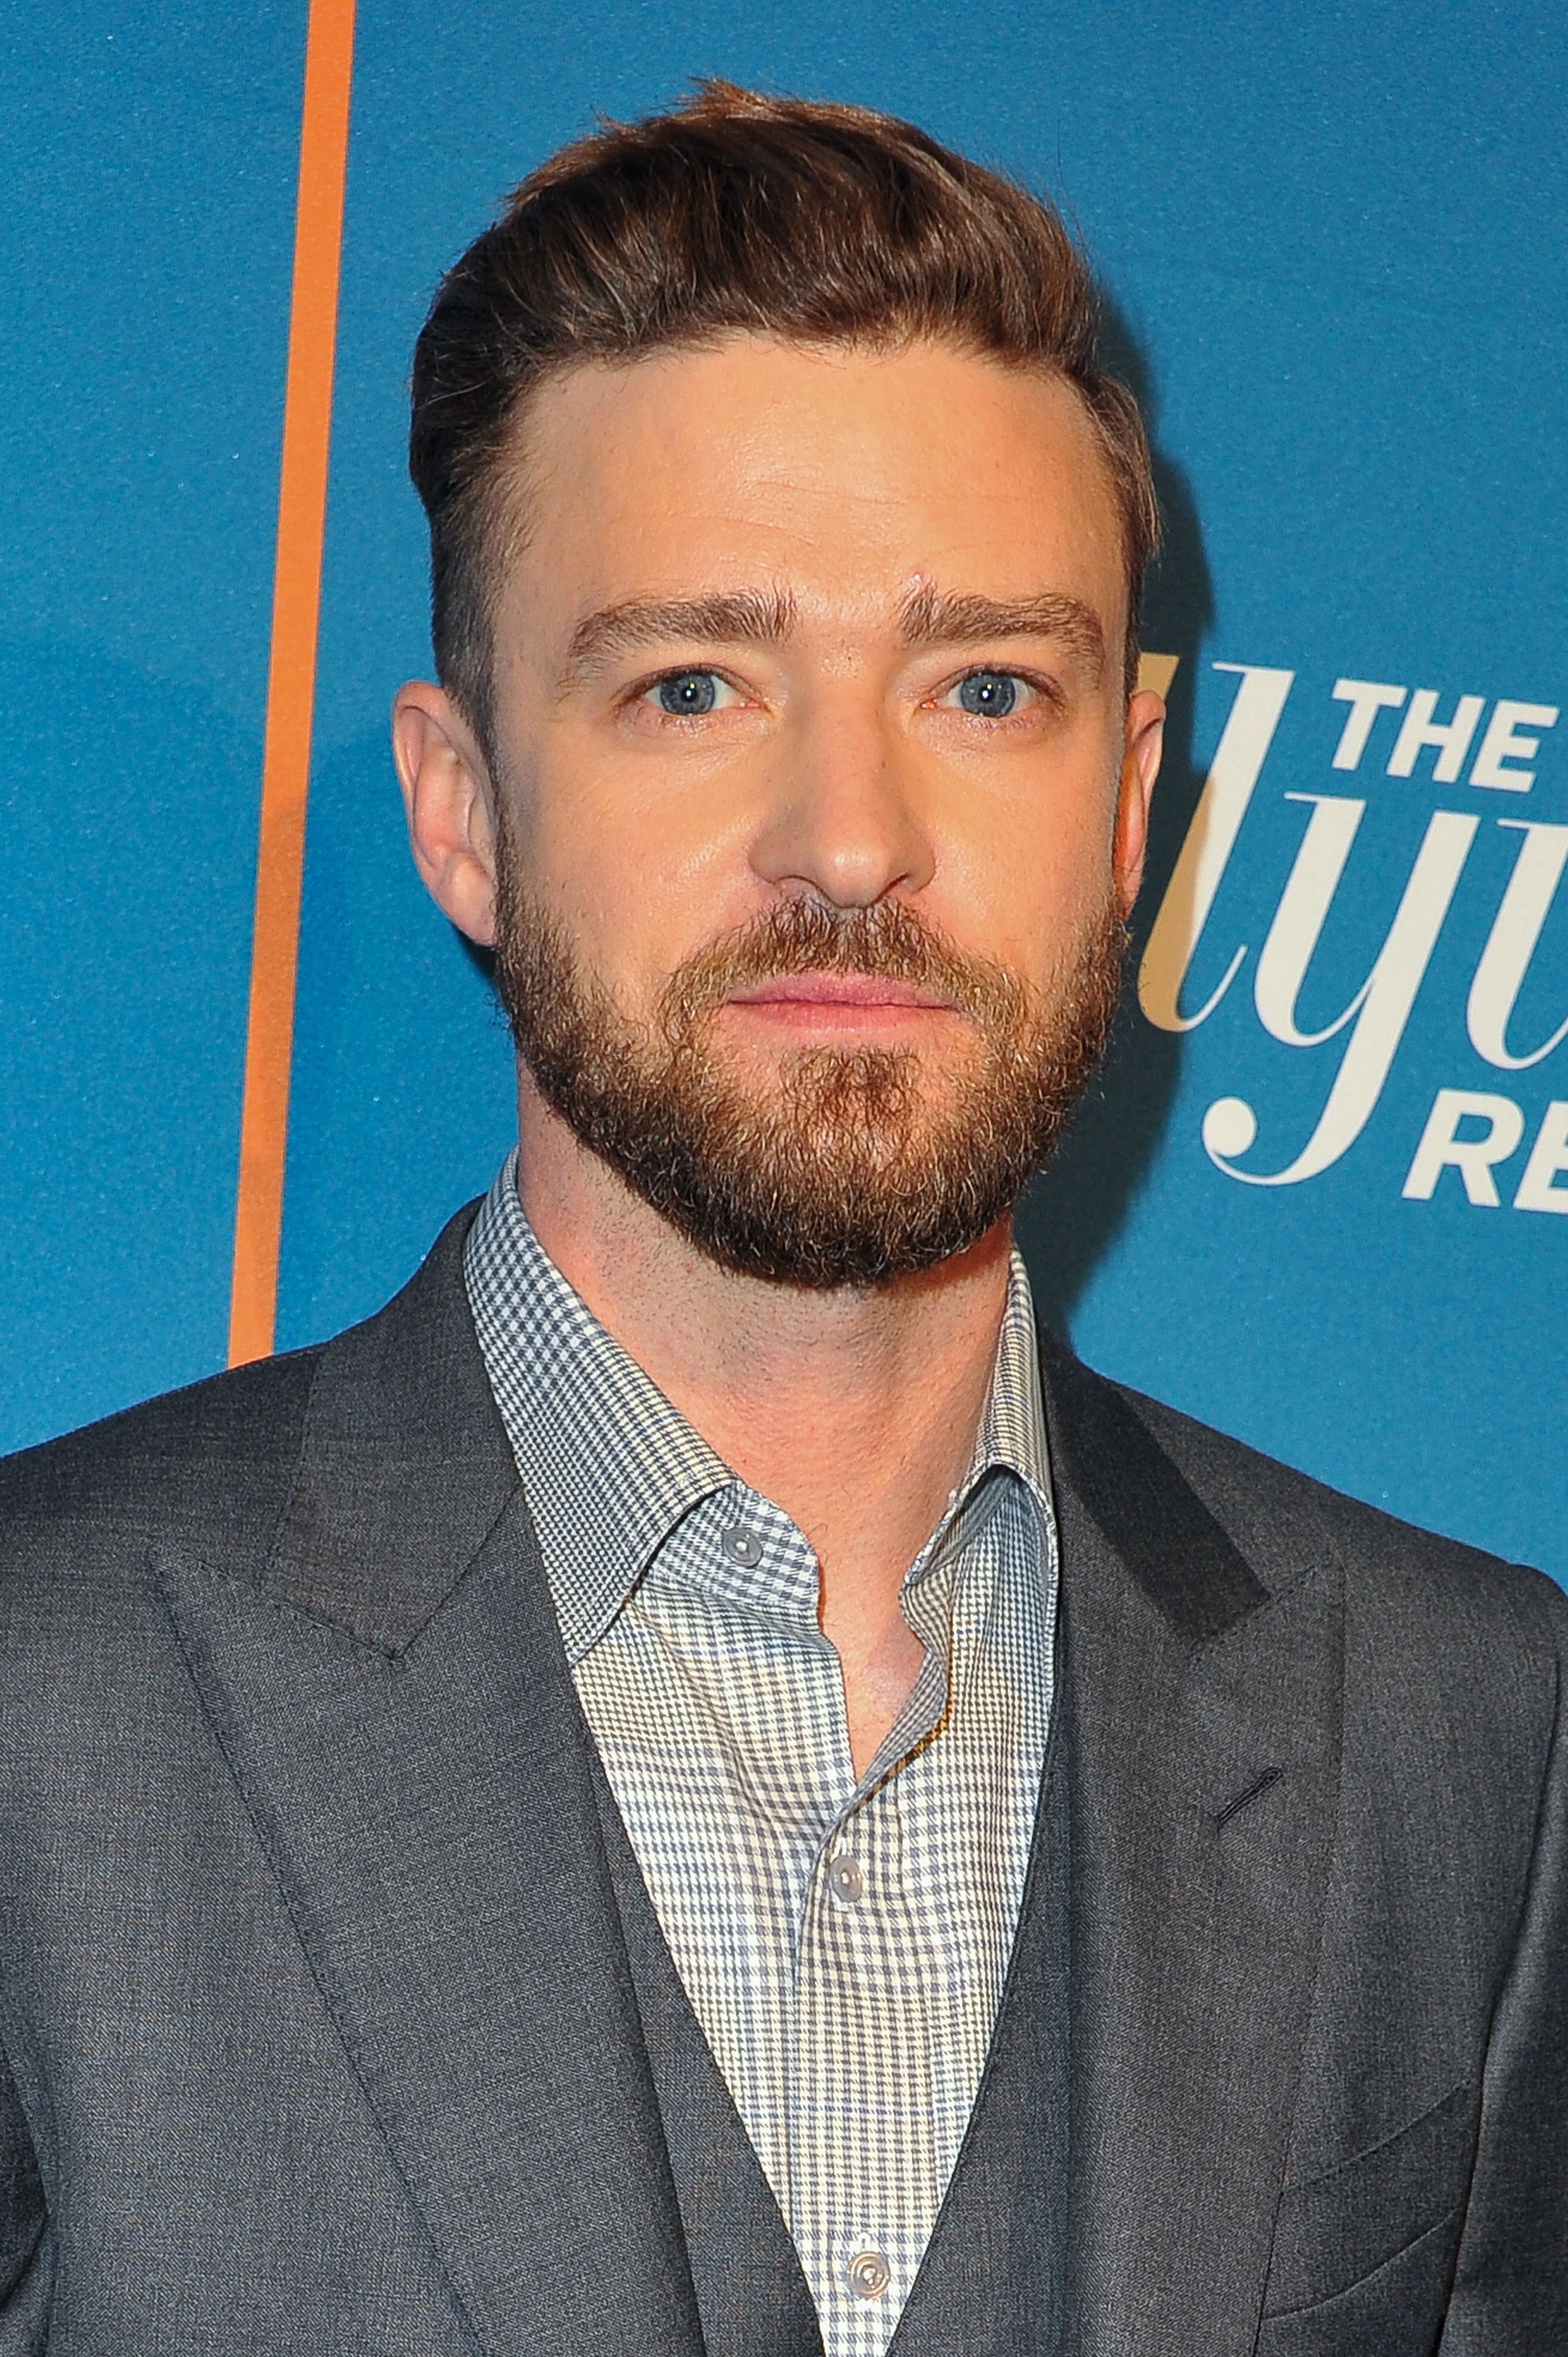 Justin Timberlake attends The Hollywood Reporter 5th Annual Nominees Night at Spago